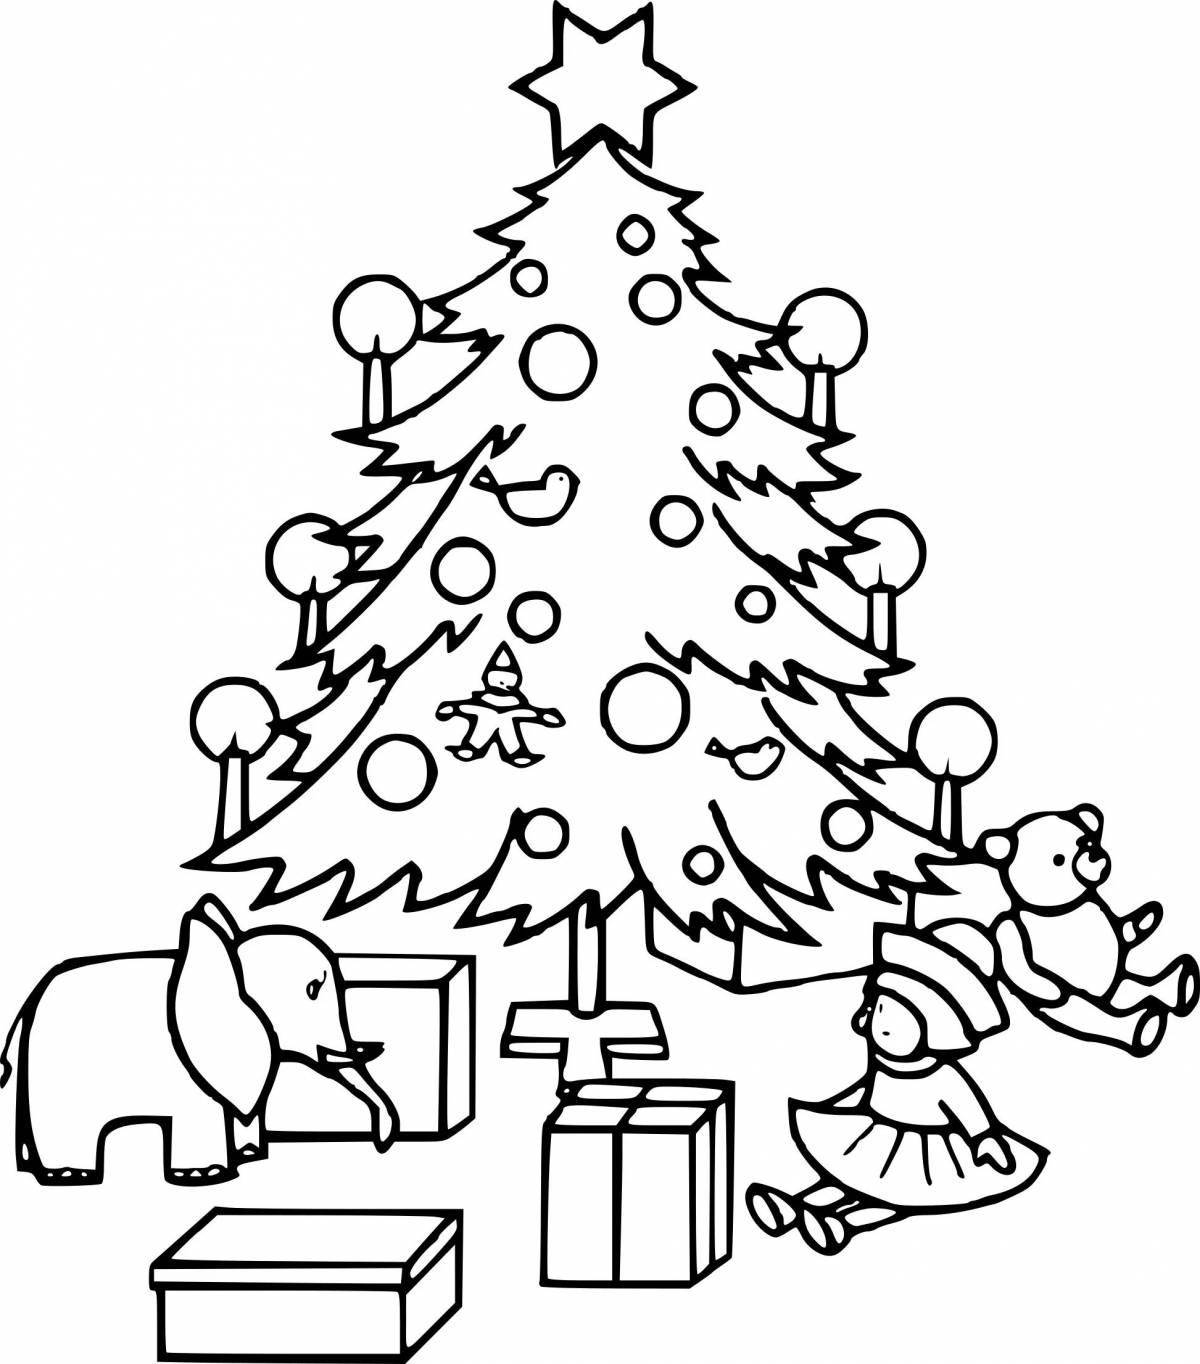 Dazzling Christmas tree with gifts